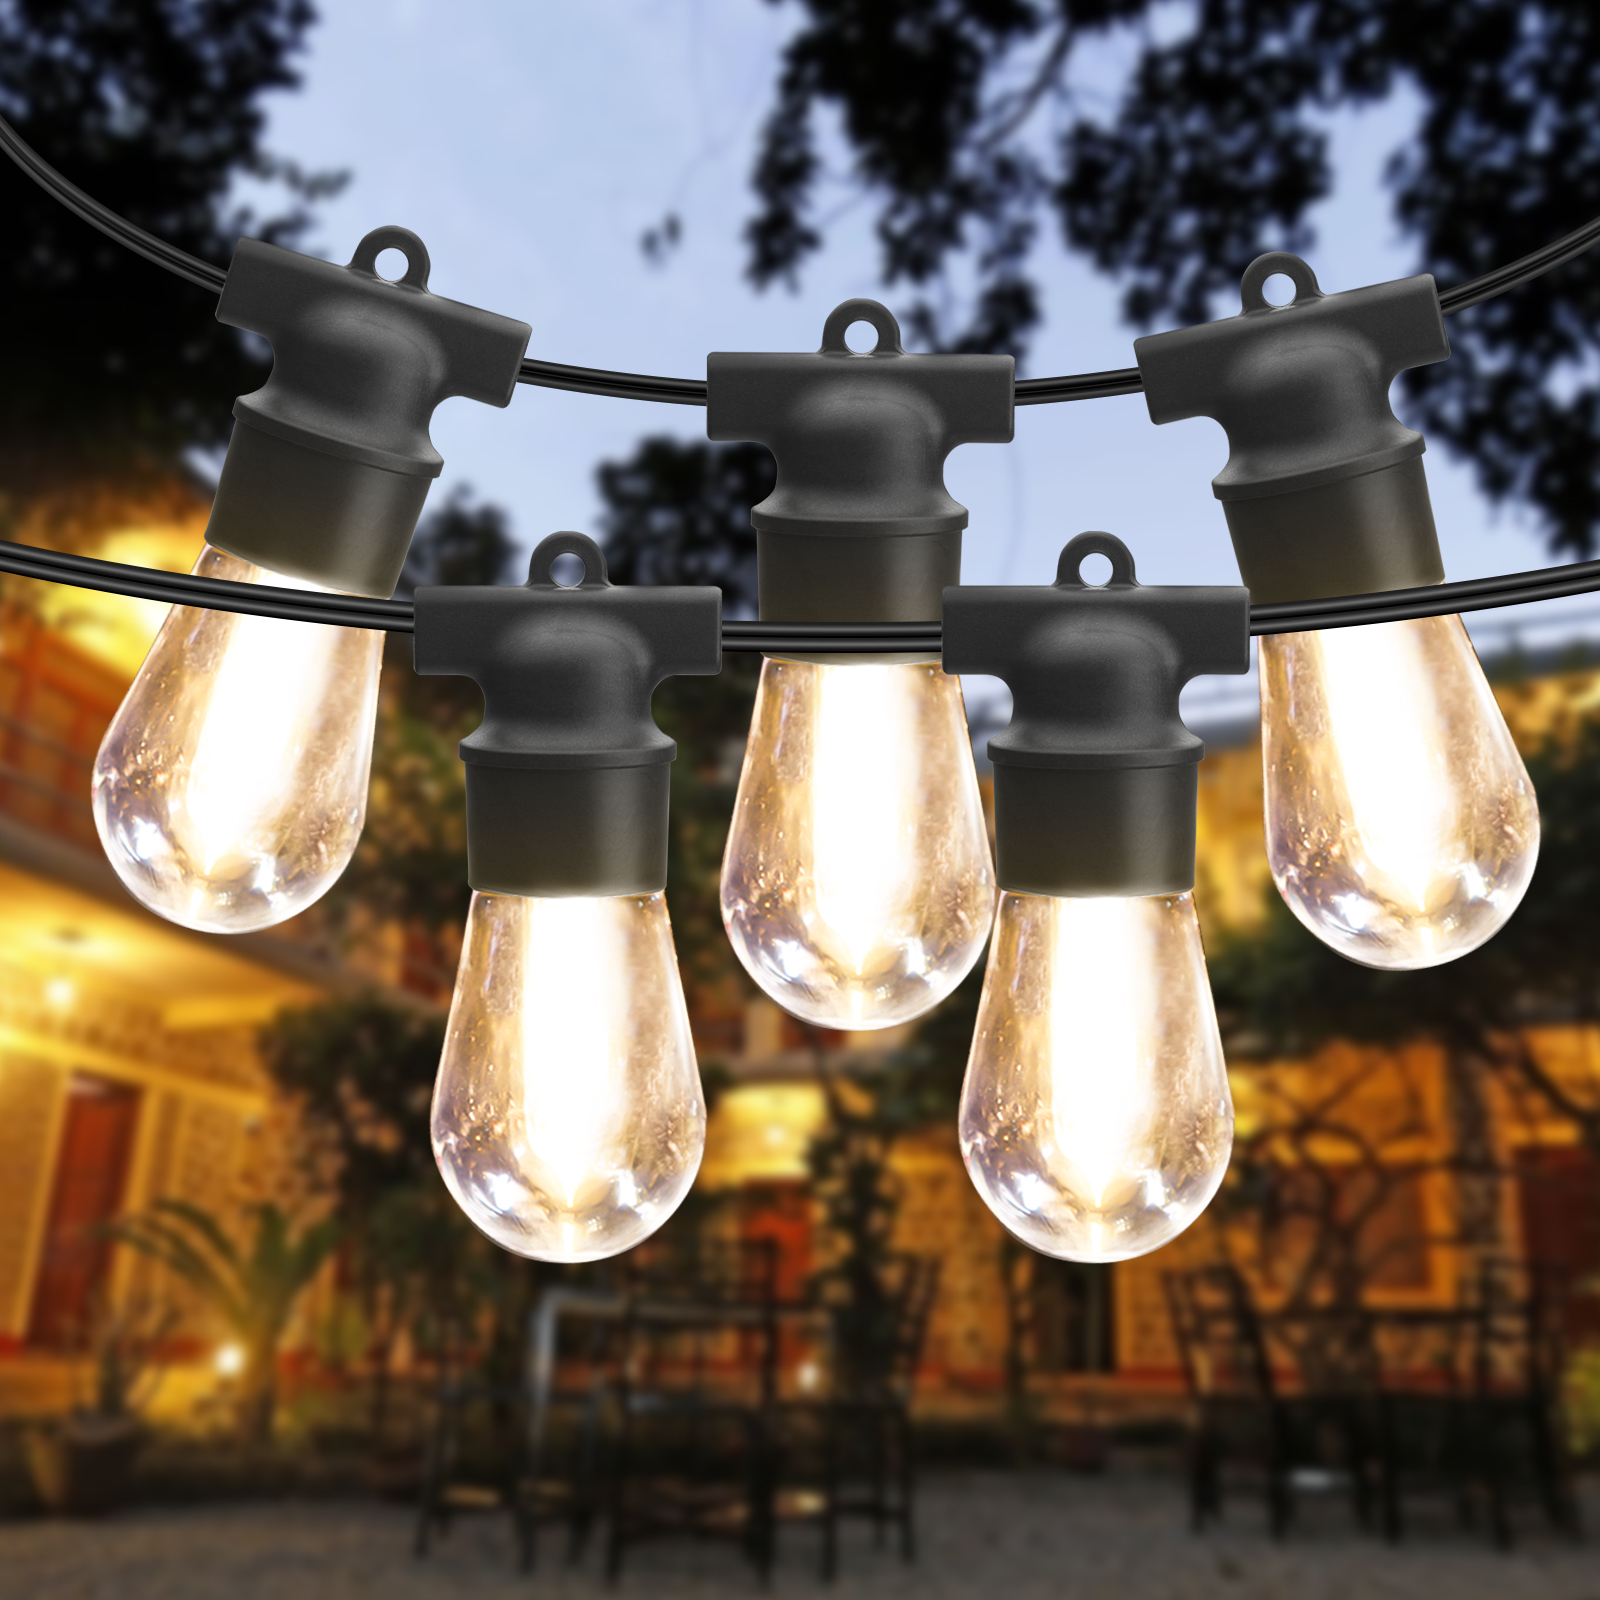 2 Pack 48FT Outdoor String Lights Waterproof Patio Lights LED String Lights Commercial Hanging Lights S14 String Lights with 4 Spare 2700K Bulbs Outdoor Lights String Decorative Patio Porch Garden